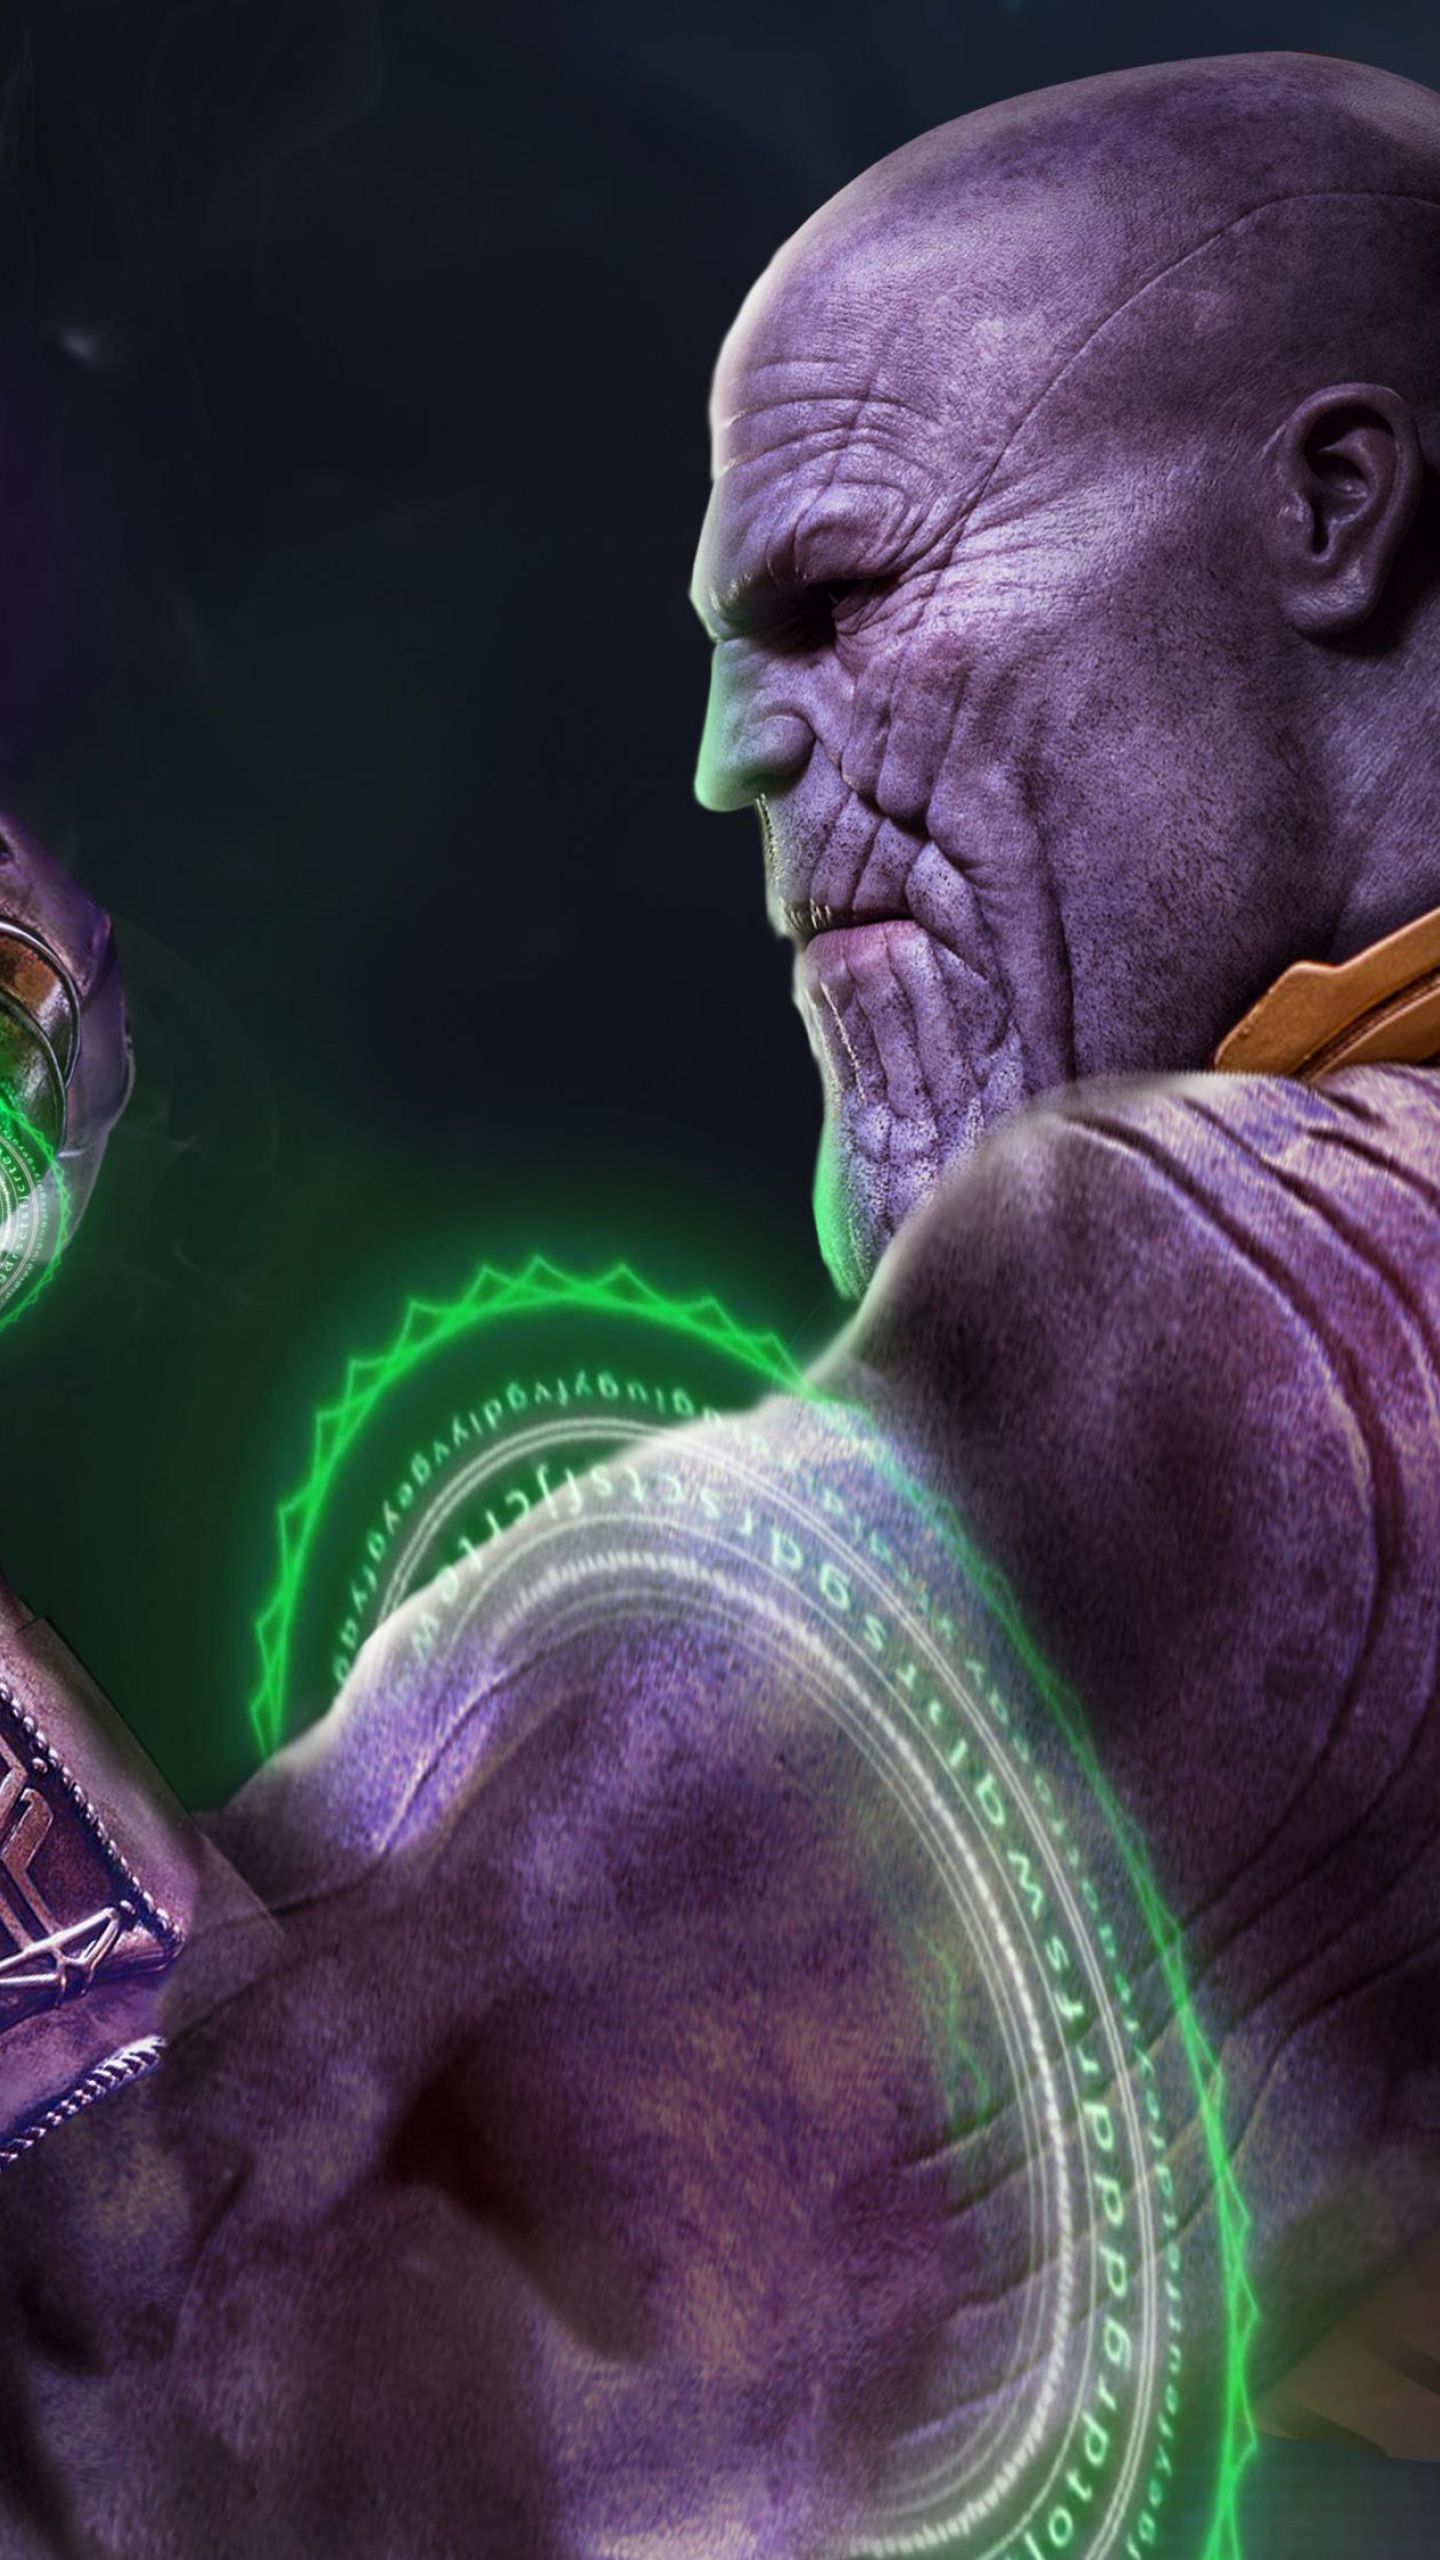 Thanos with Infinity Gauntlet Samsung Galaxy S S7